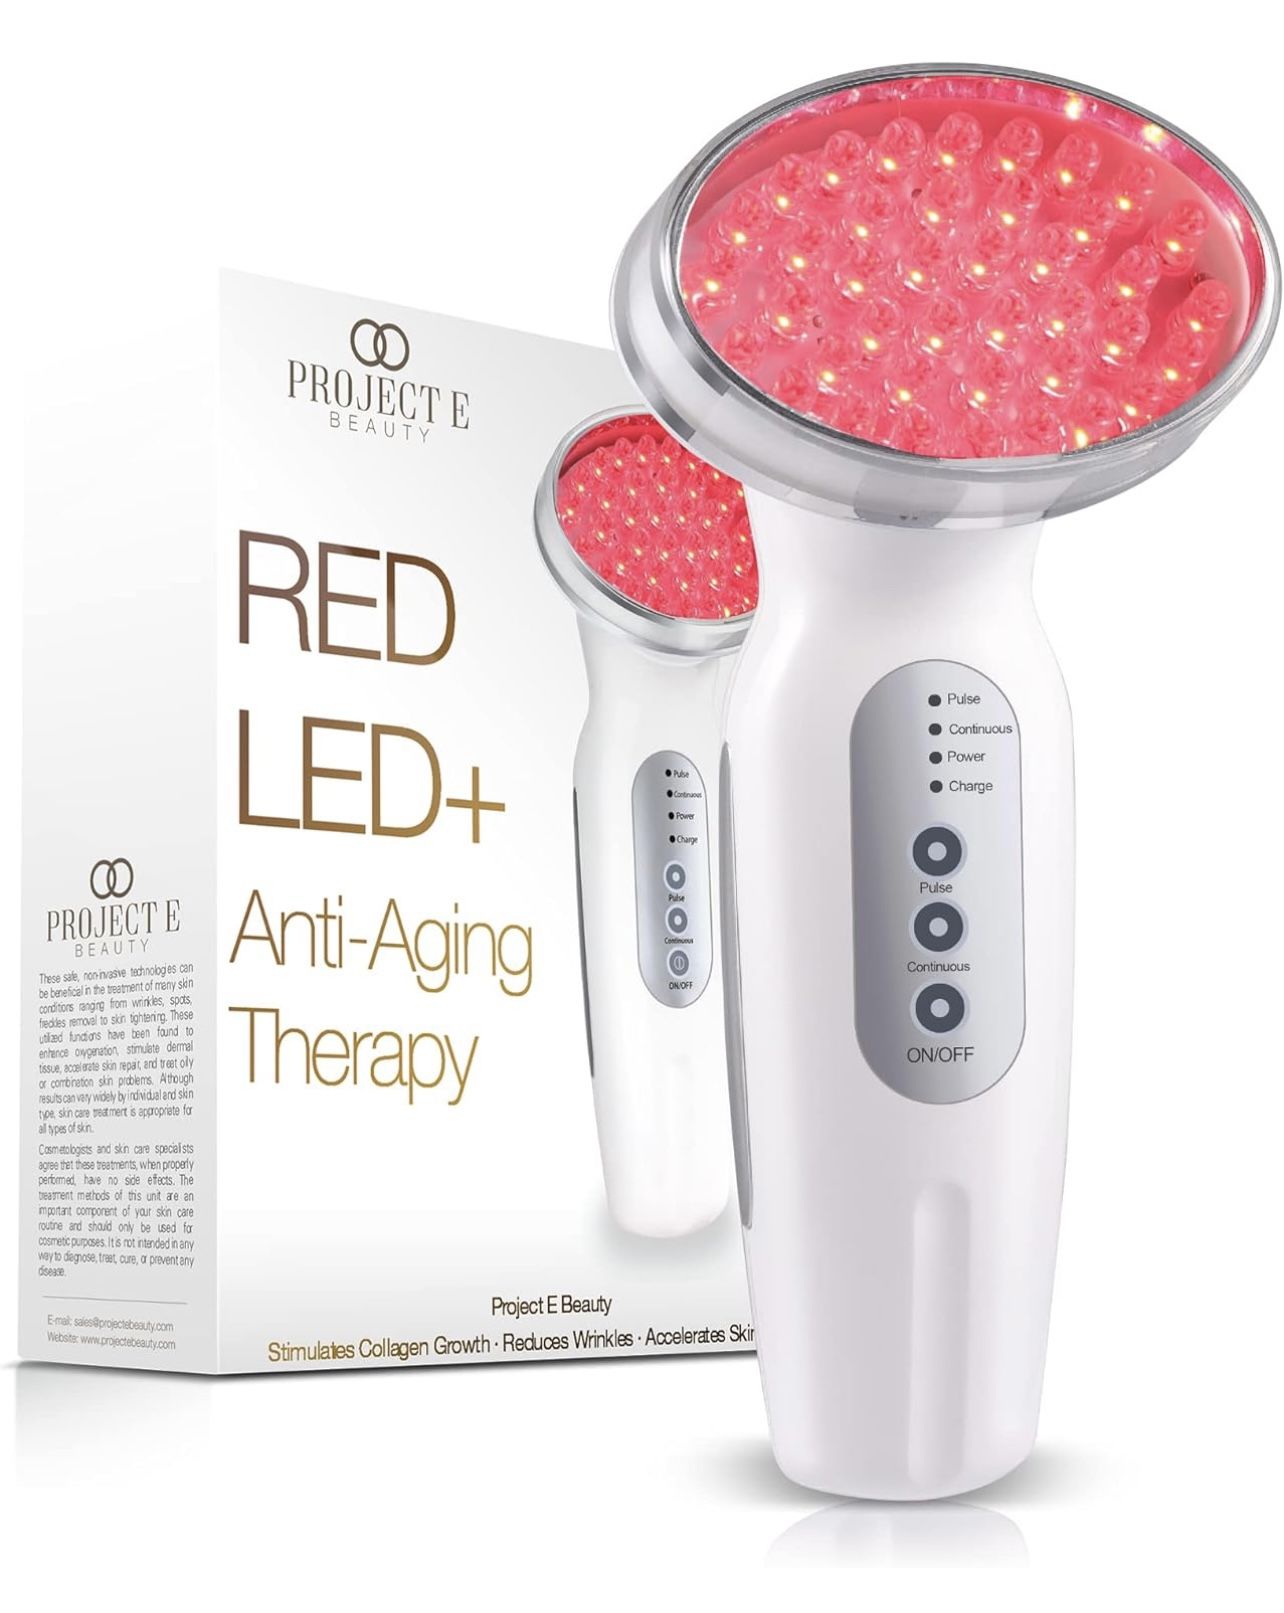 RED LED Therapy Light 